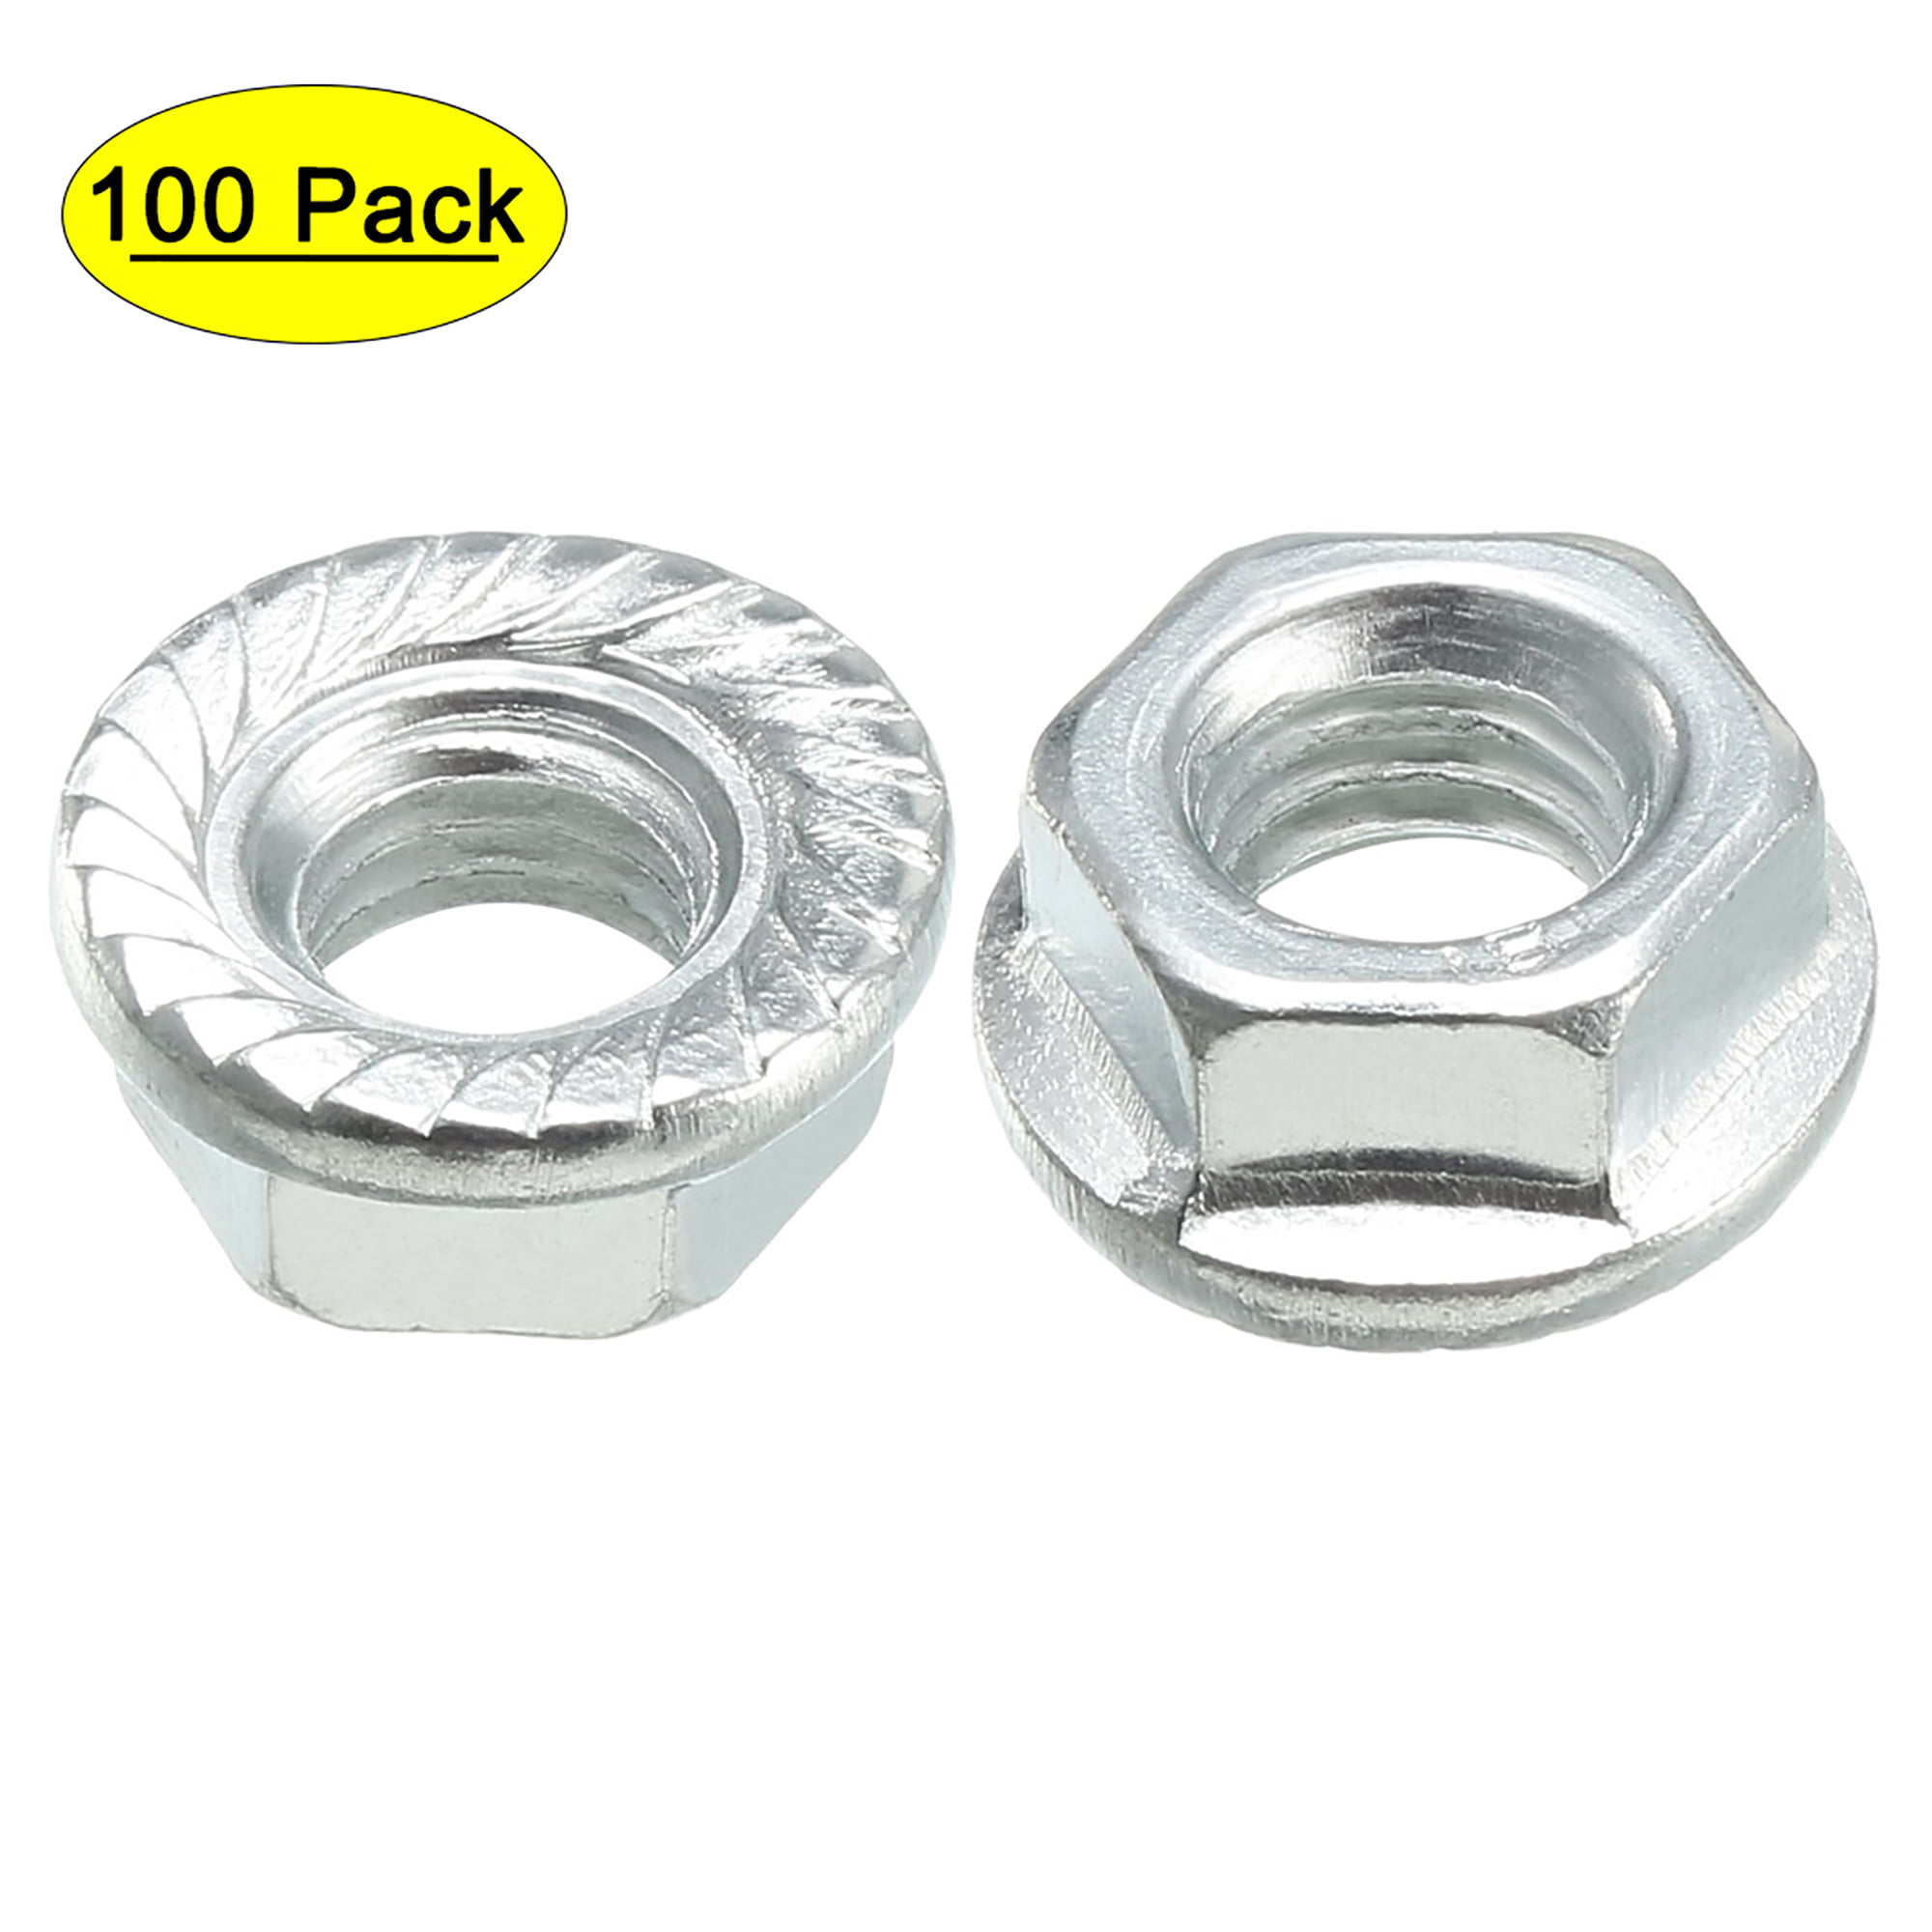 1/2-13 Stainless Steel Flange Nuts Serrated Base Lock Anti Vibration Qty 25 